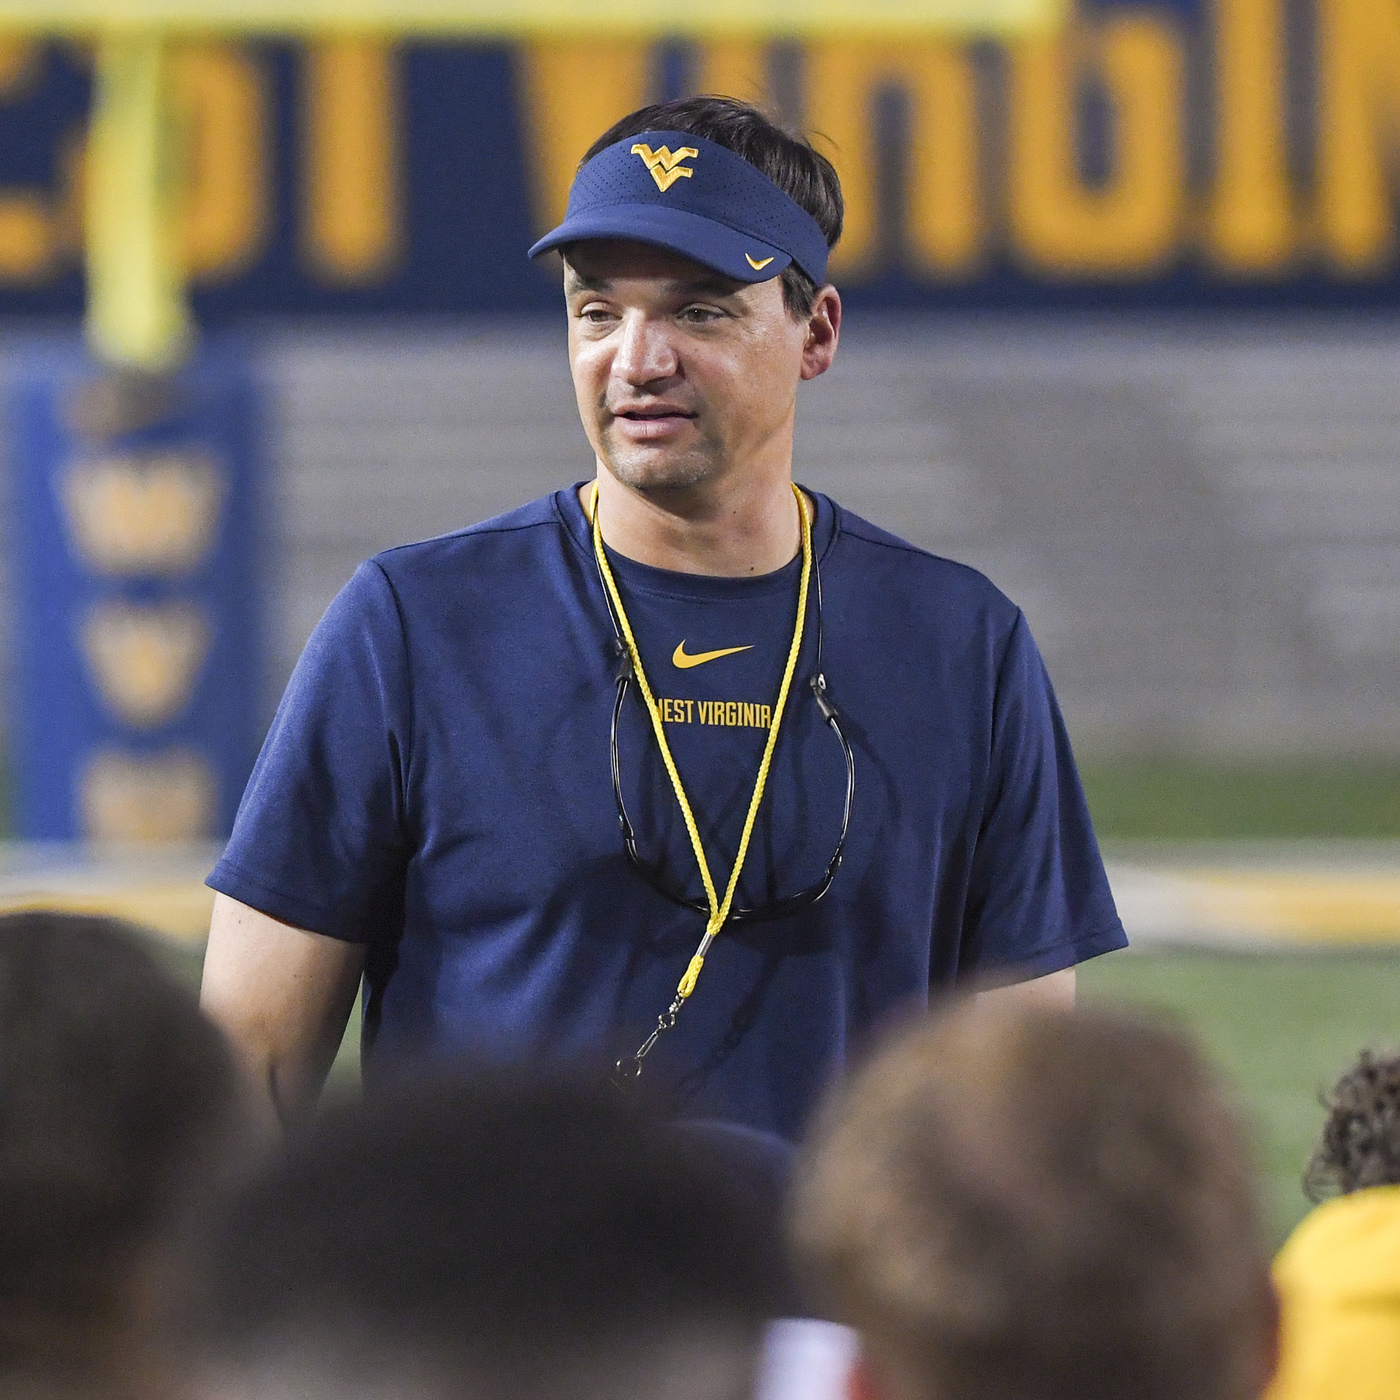 WVU coach Neal Brown News Conference | 8-27-19